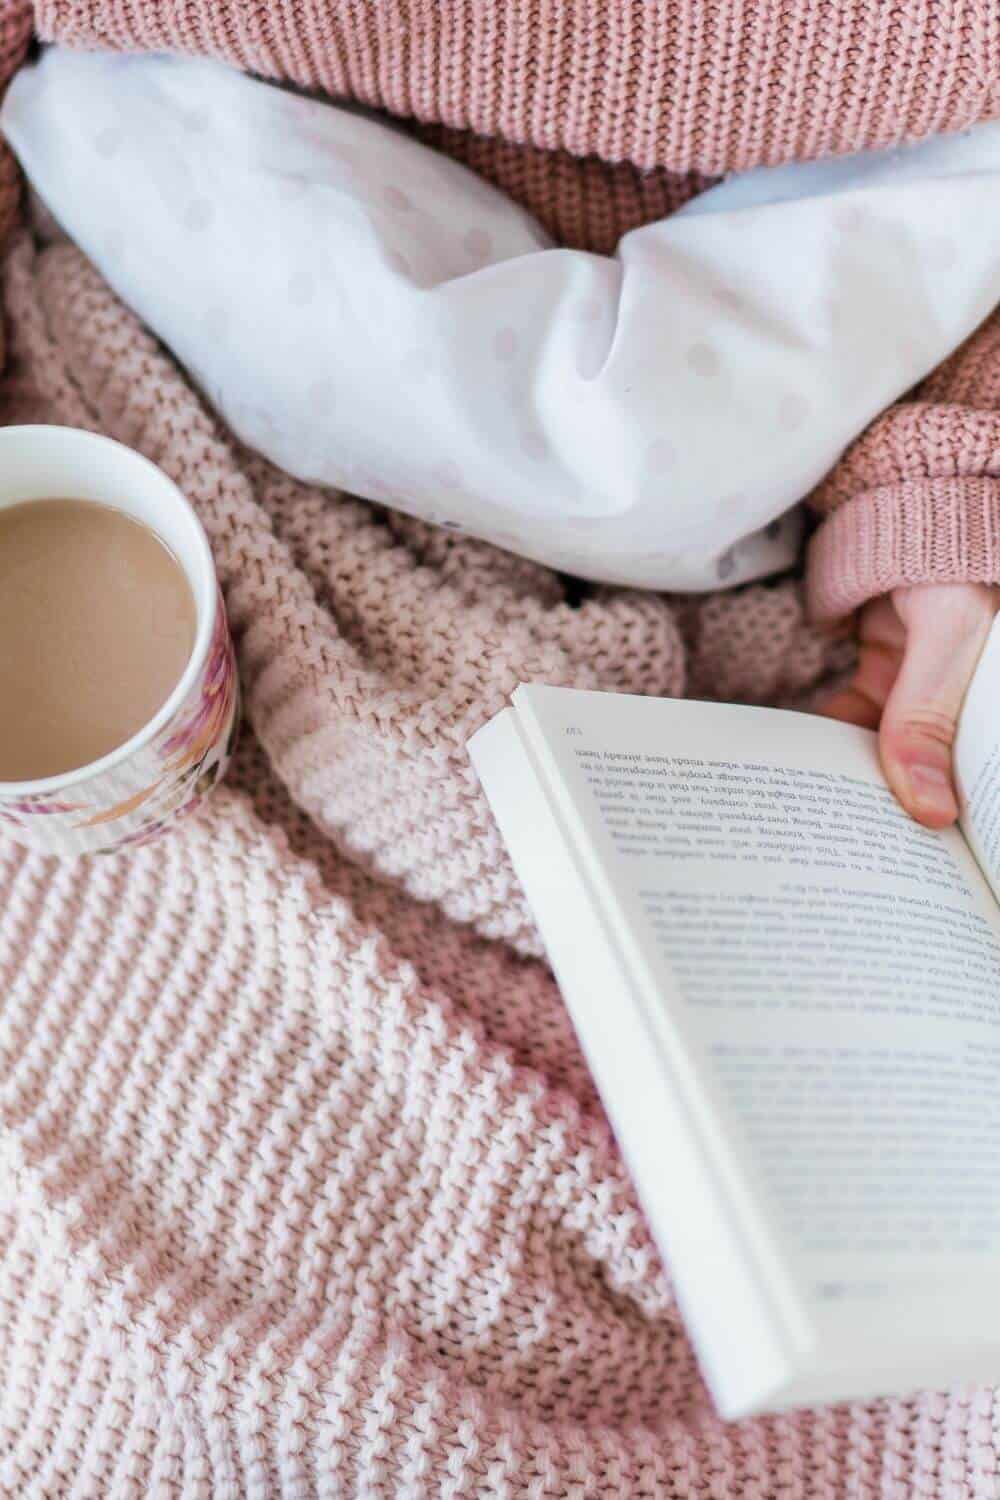 A woman reading in bed with a cup of coffee